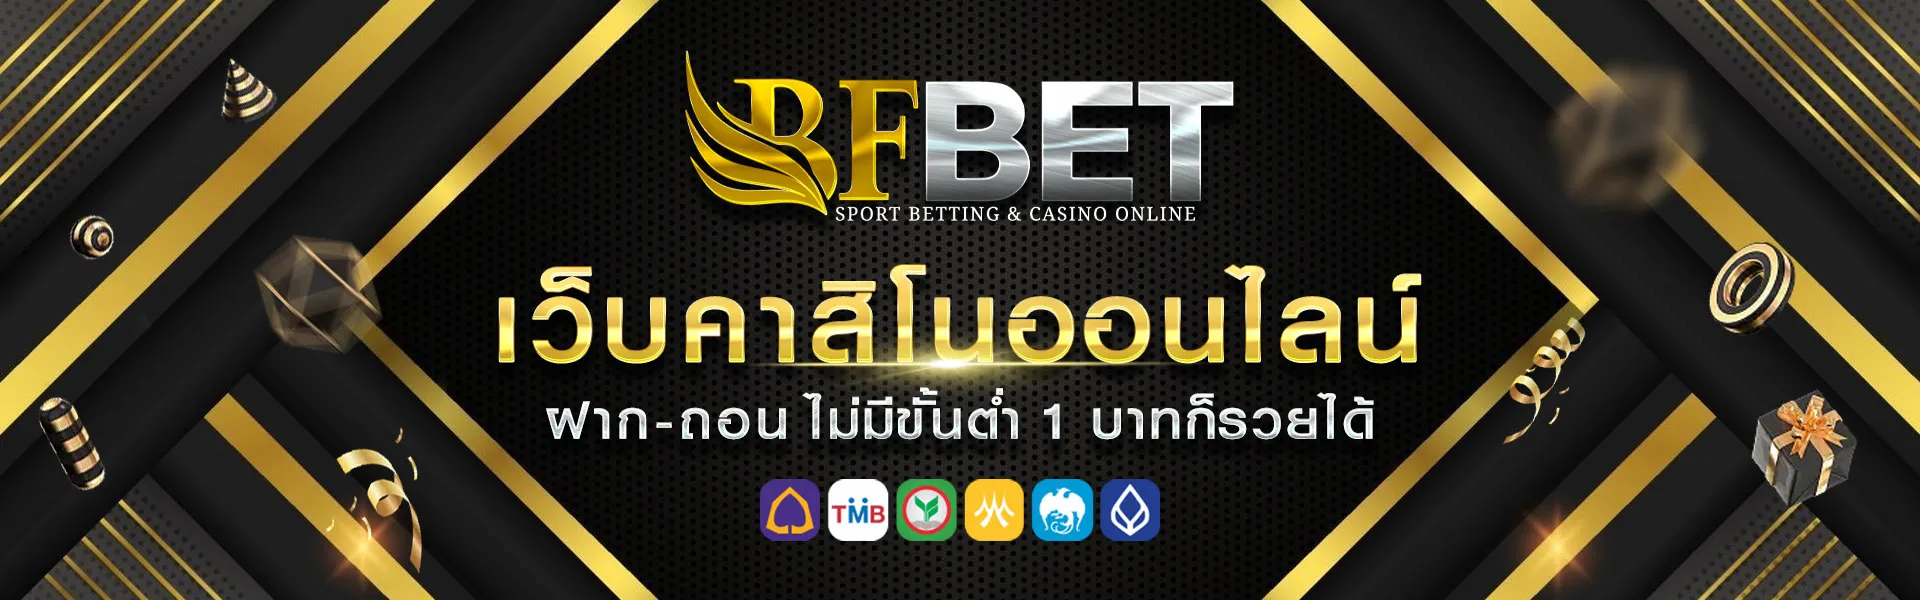 bf bet